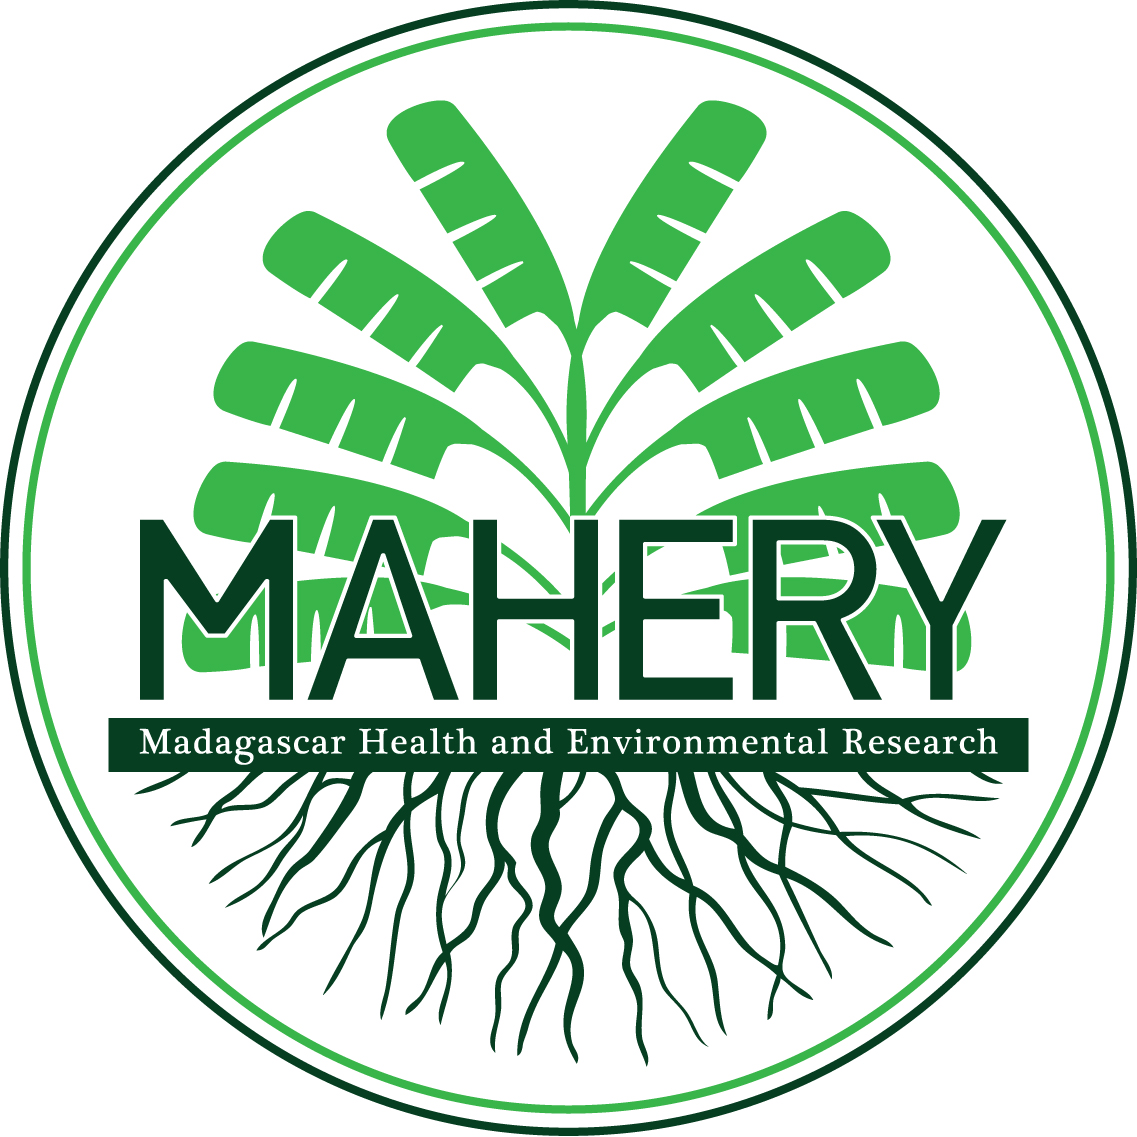 ABOUT MAHERY